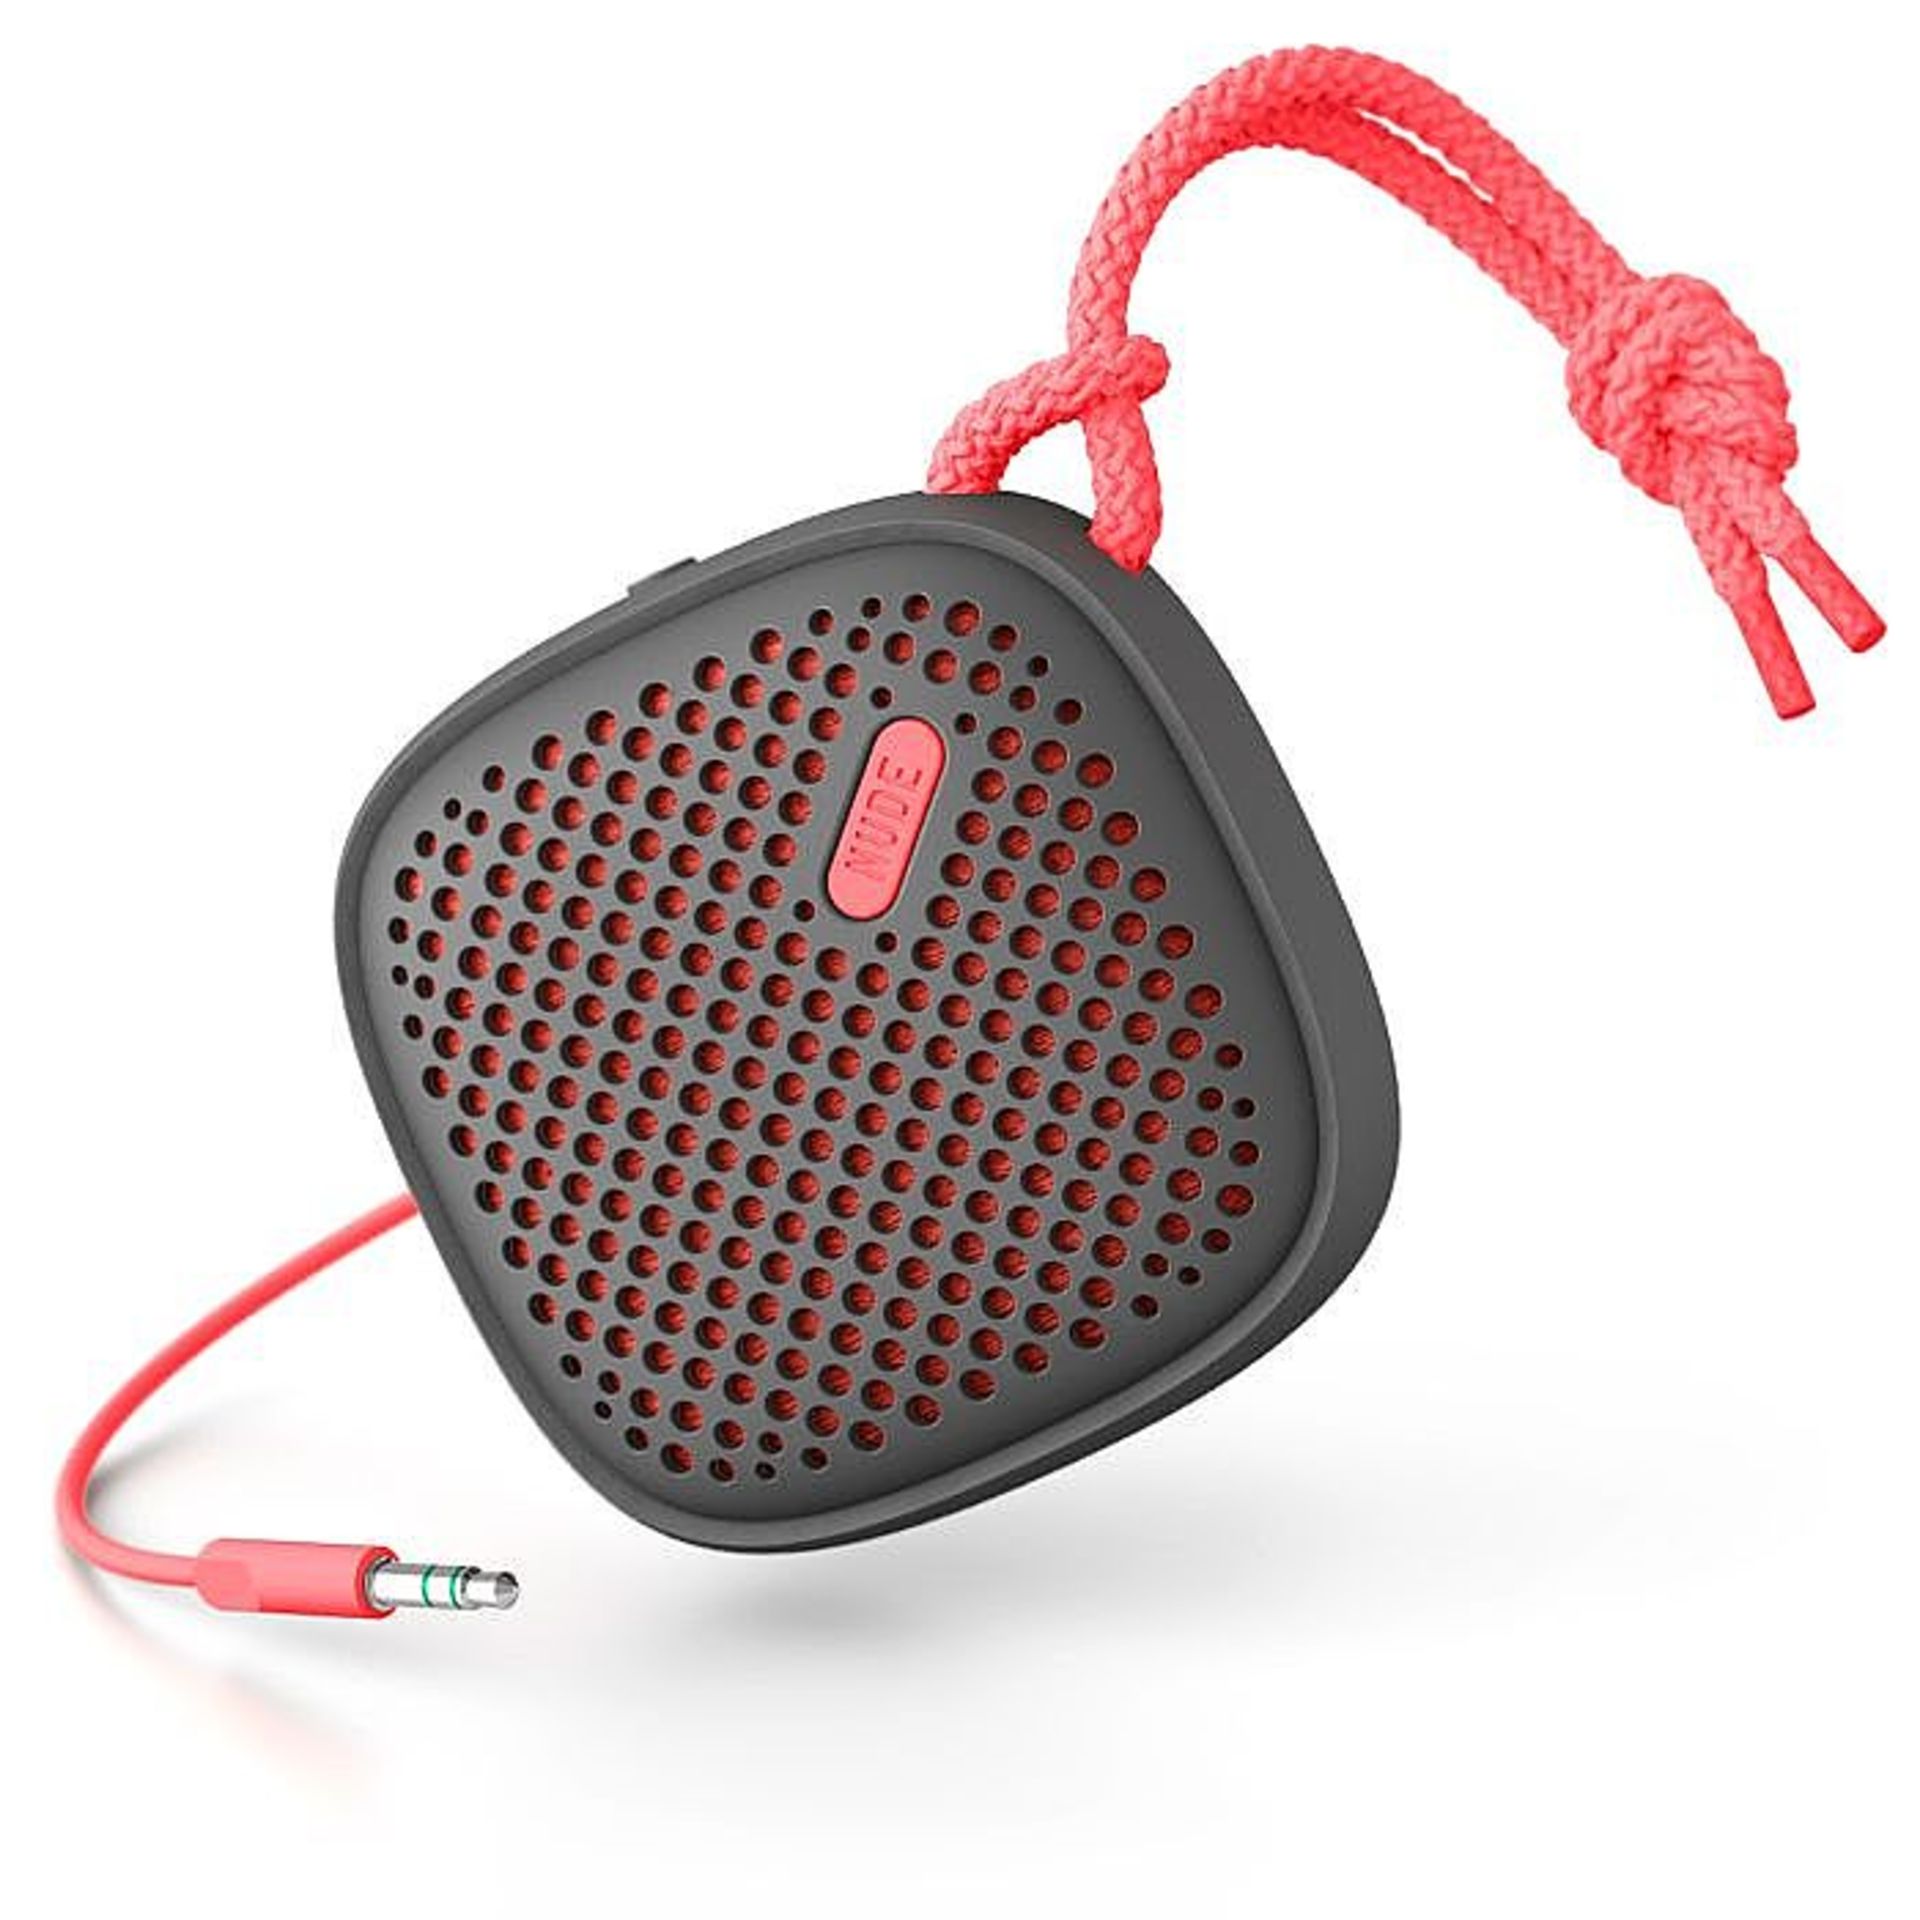 V *TRADE QTY* Brand New Nude Audio Move S Wired Portable Speaker - Coral X120 YOUR BID PRICE TO BE